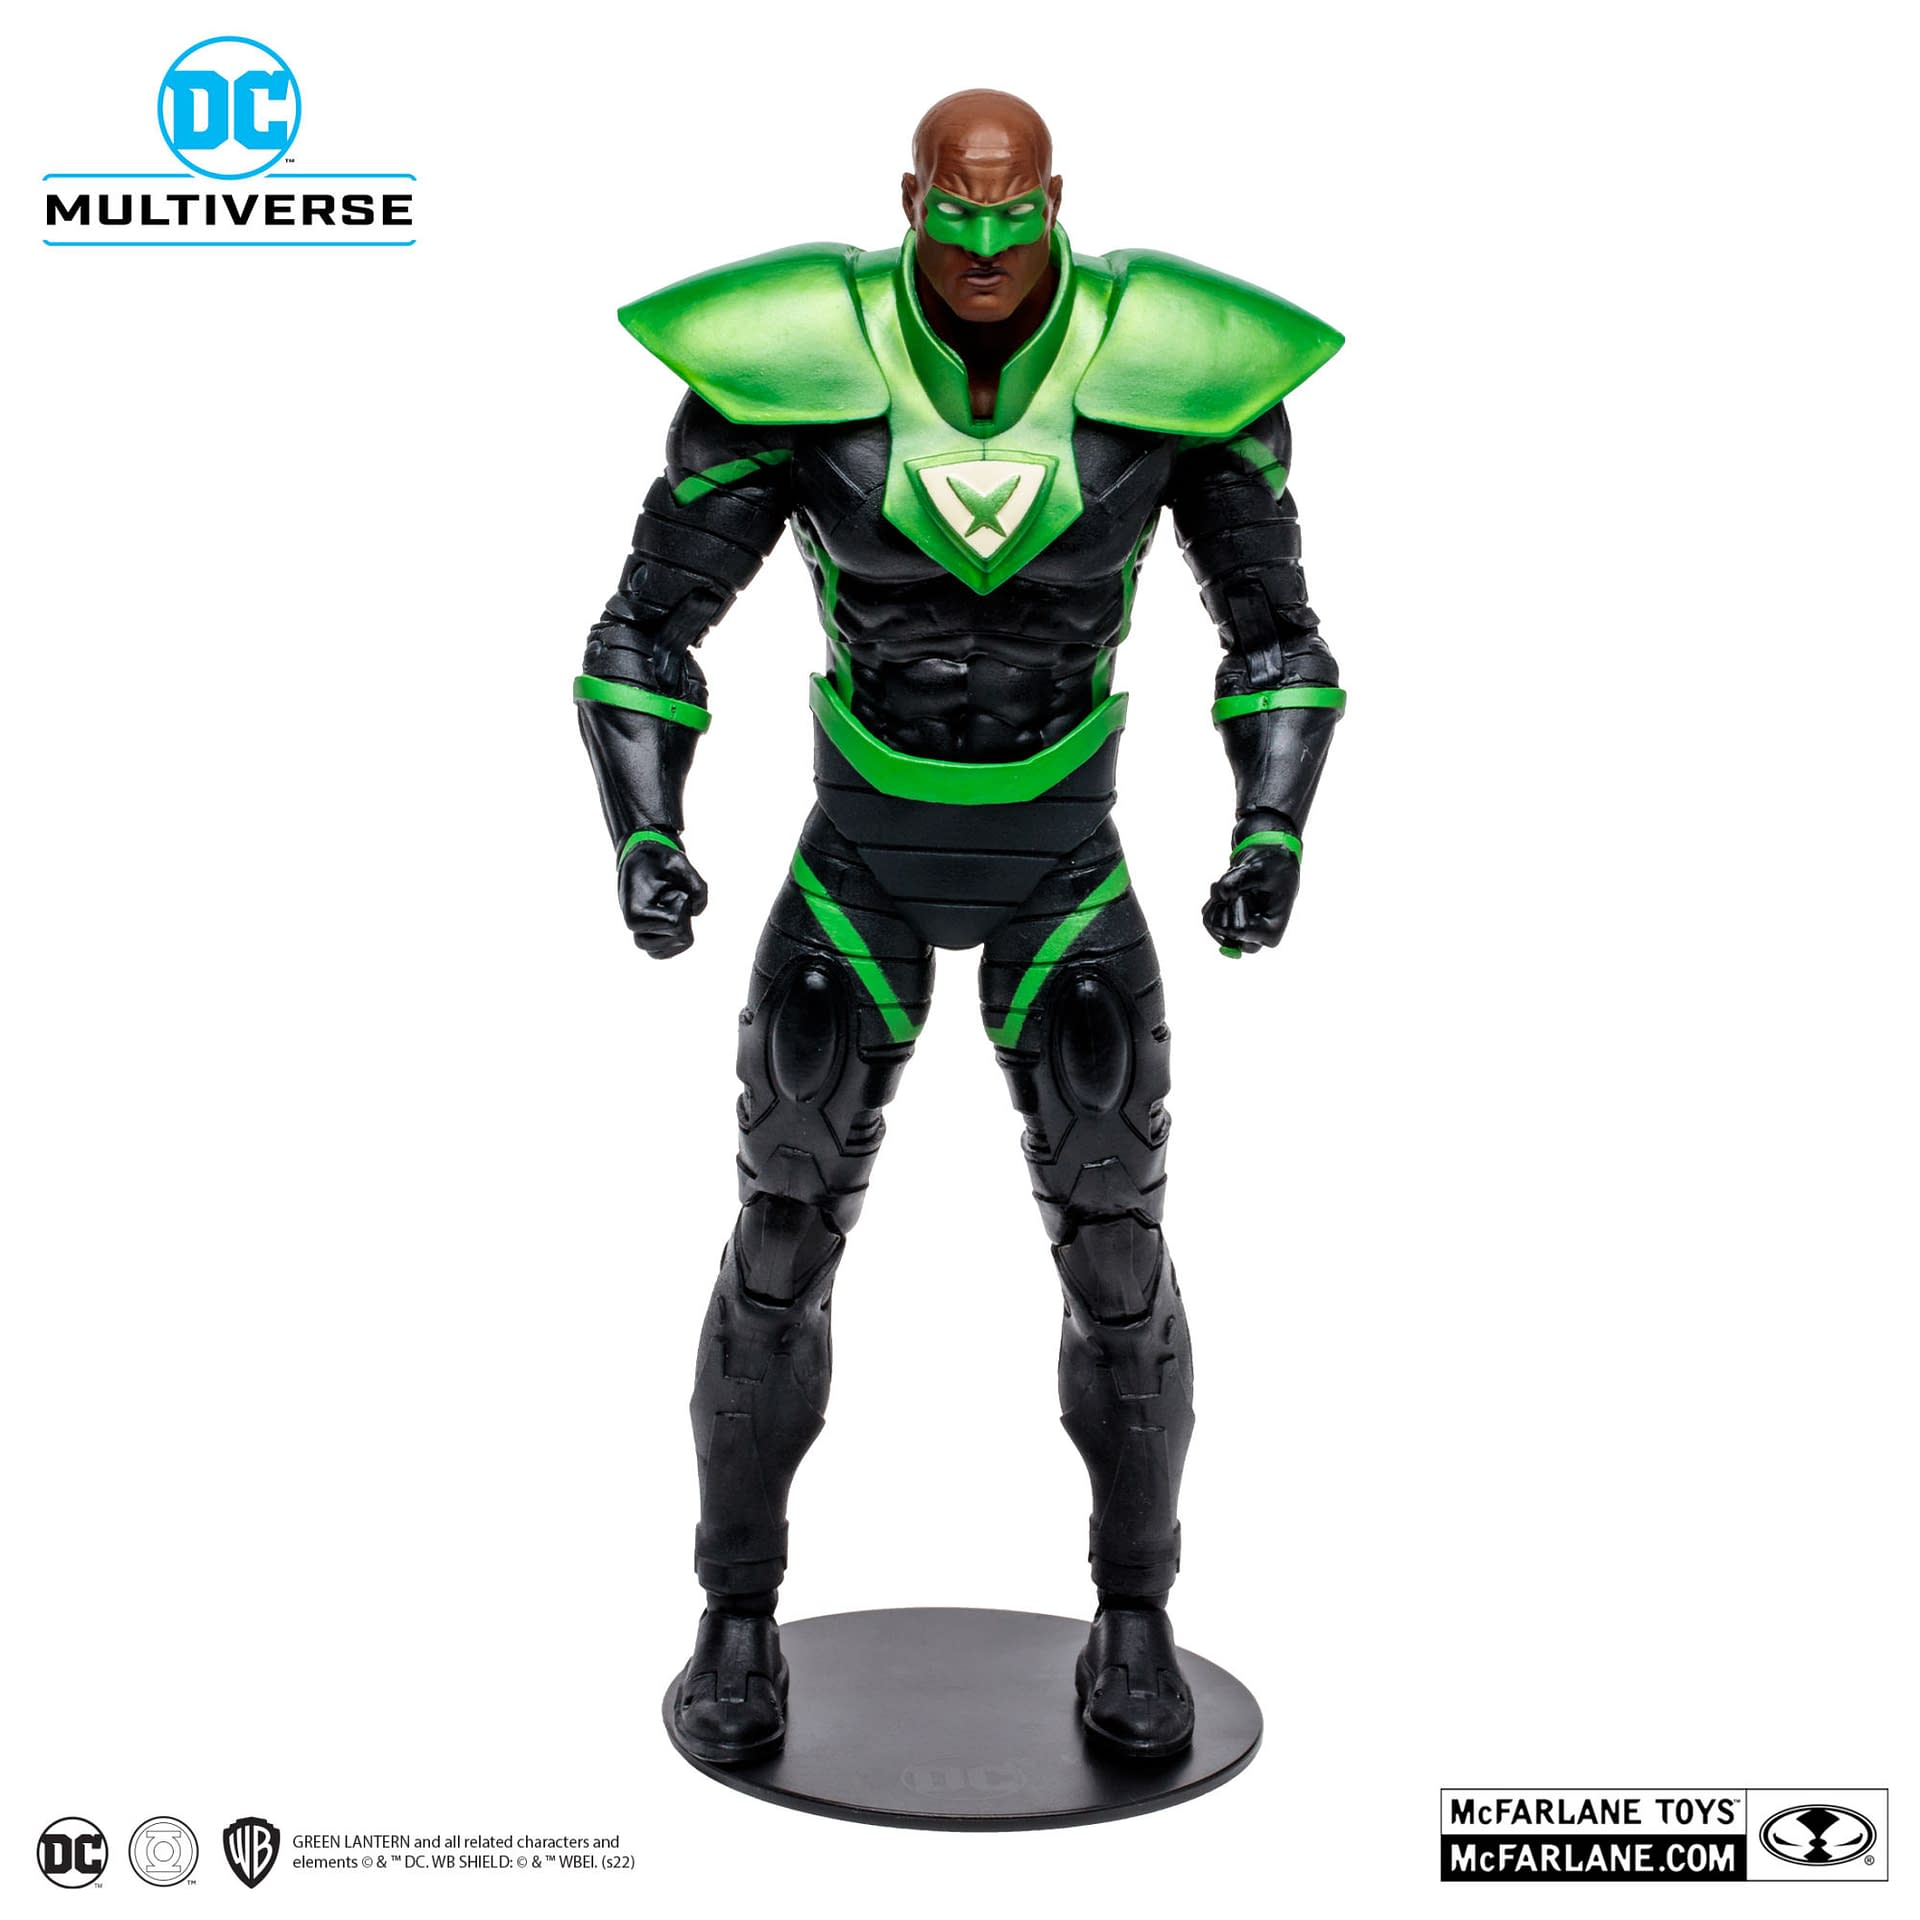 DC Comics Crime Syndicate Power Ring Revealed by McFarlane Toys